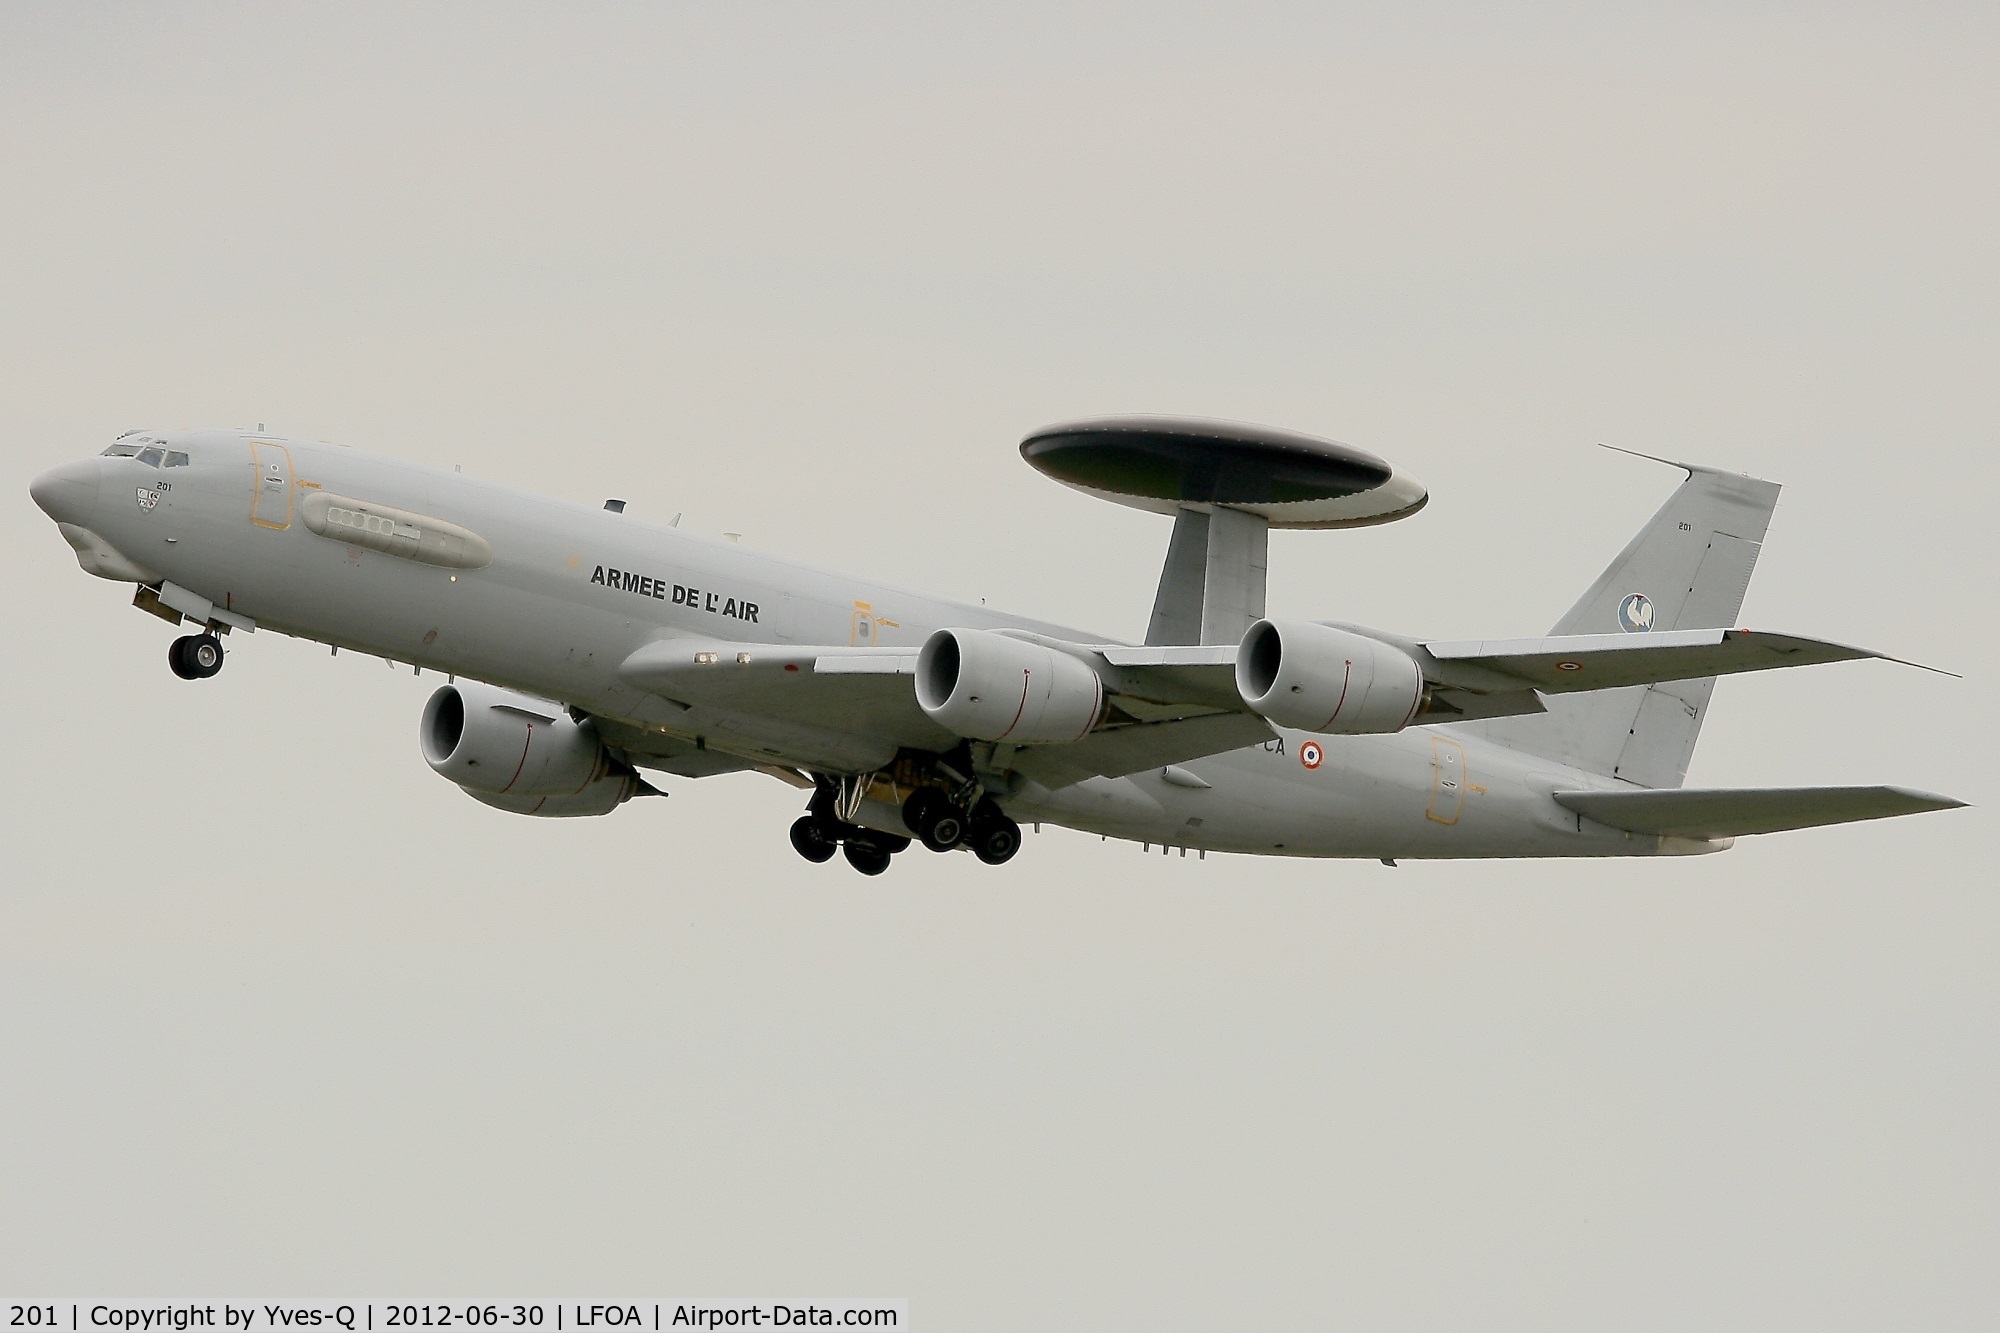 201, 1990 Boeing E-3F Sentry C/N 24115, French Air Force Boing E-3F SDCA, Take off rwy 24, Avord Air Base 702 (LFOA)  Open day in june 2012